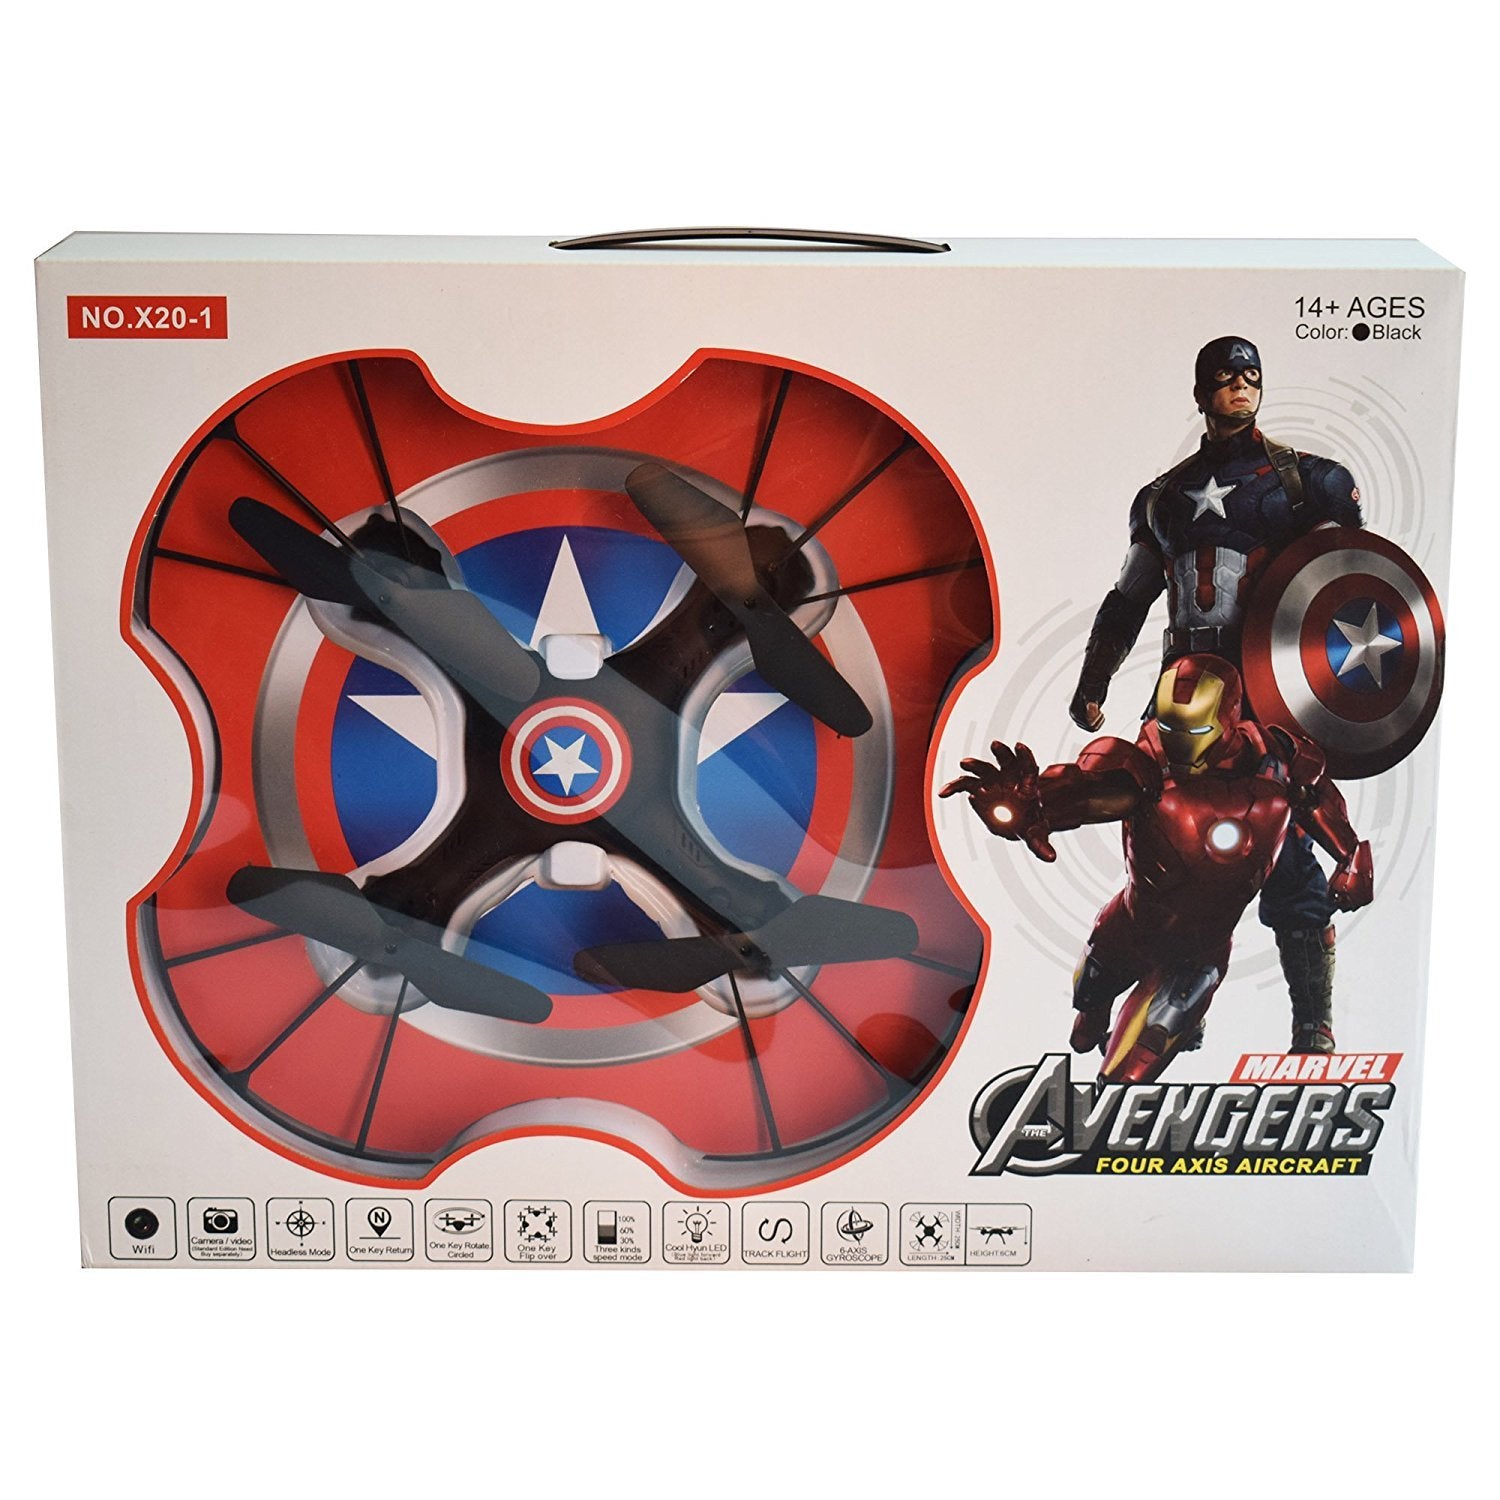 Toy Drone Marvel Avengers No.X20-1